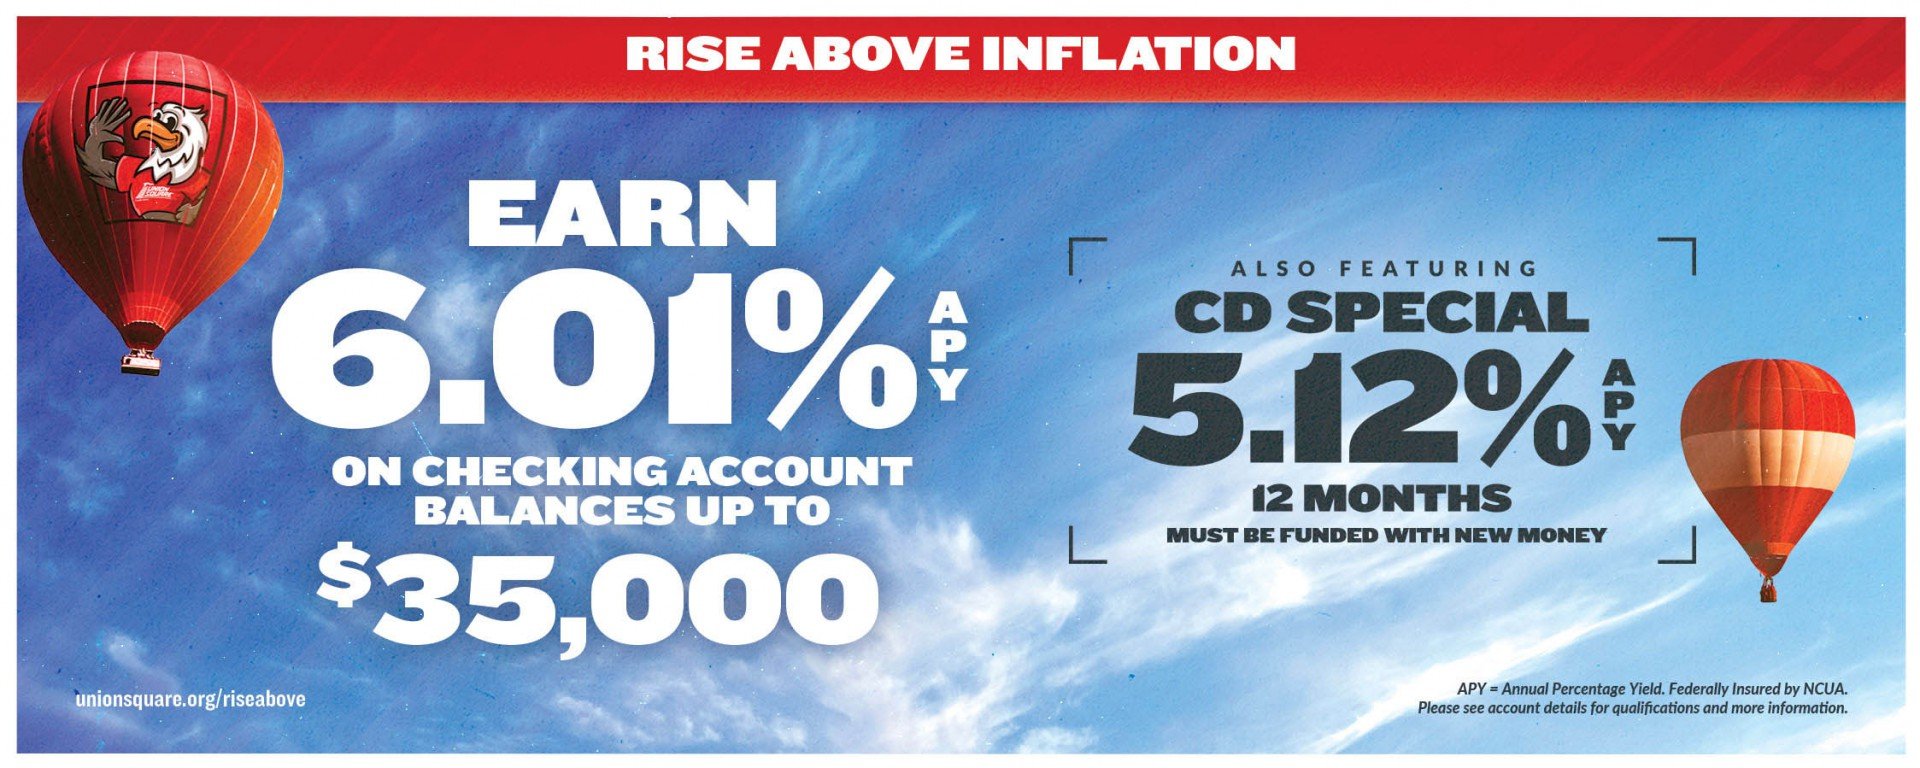 Rise Above Inflation